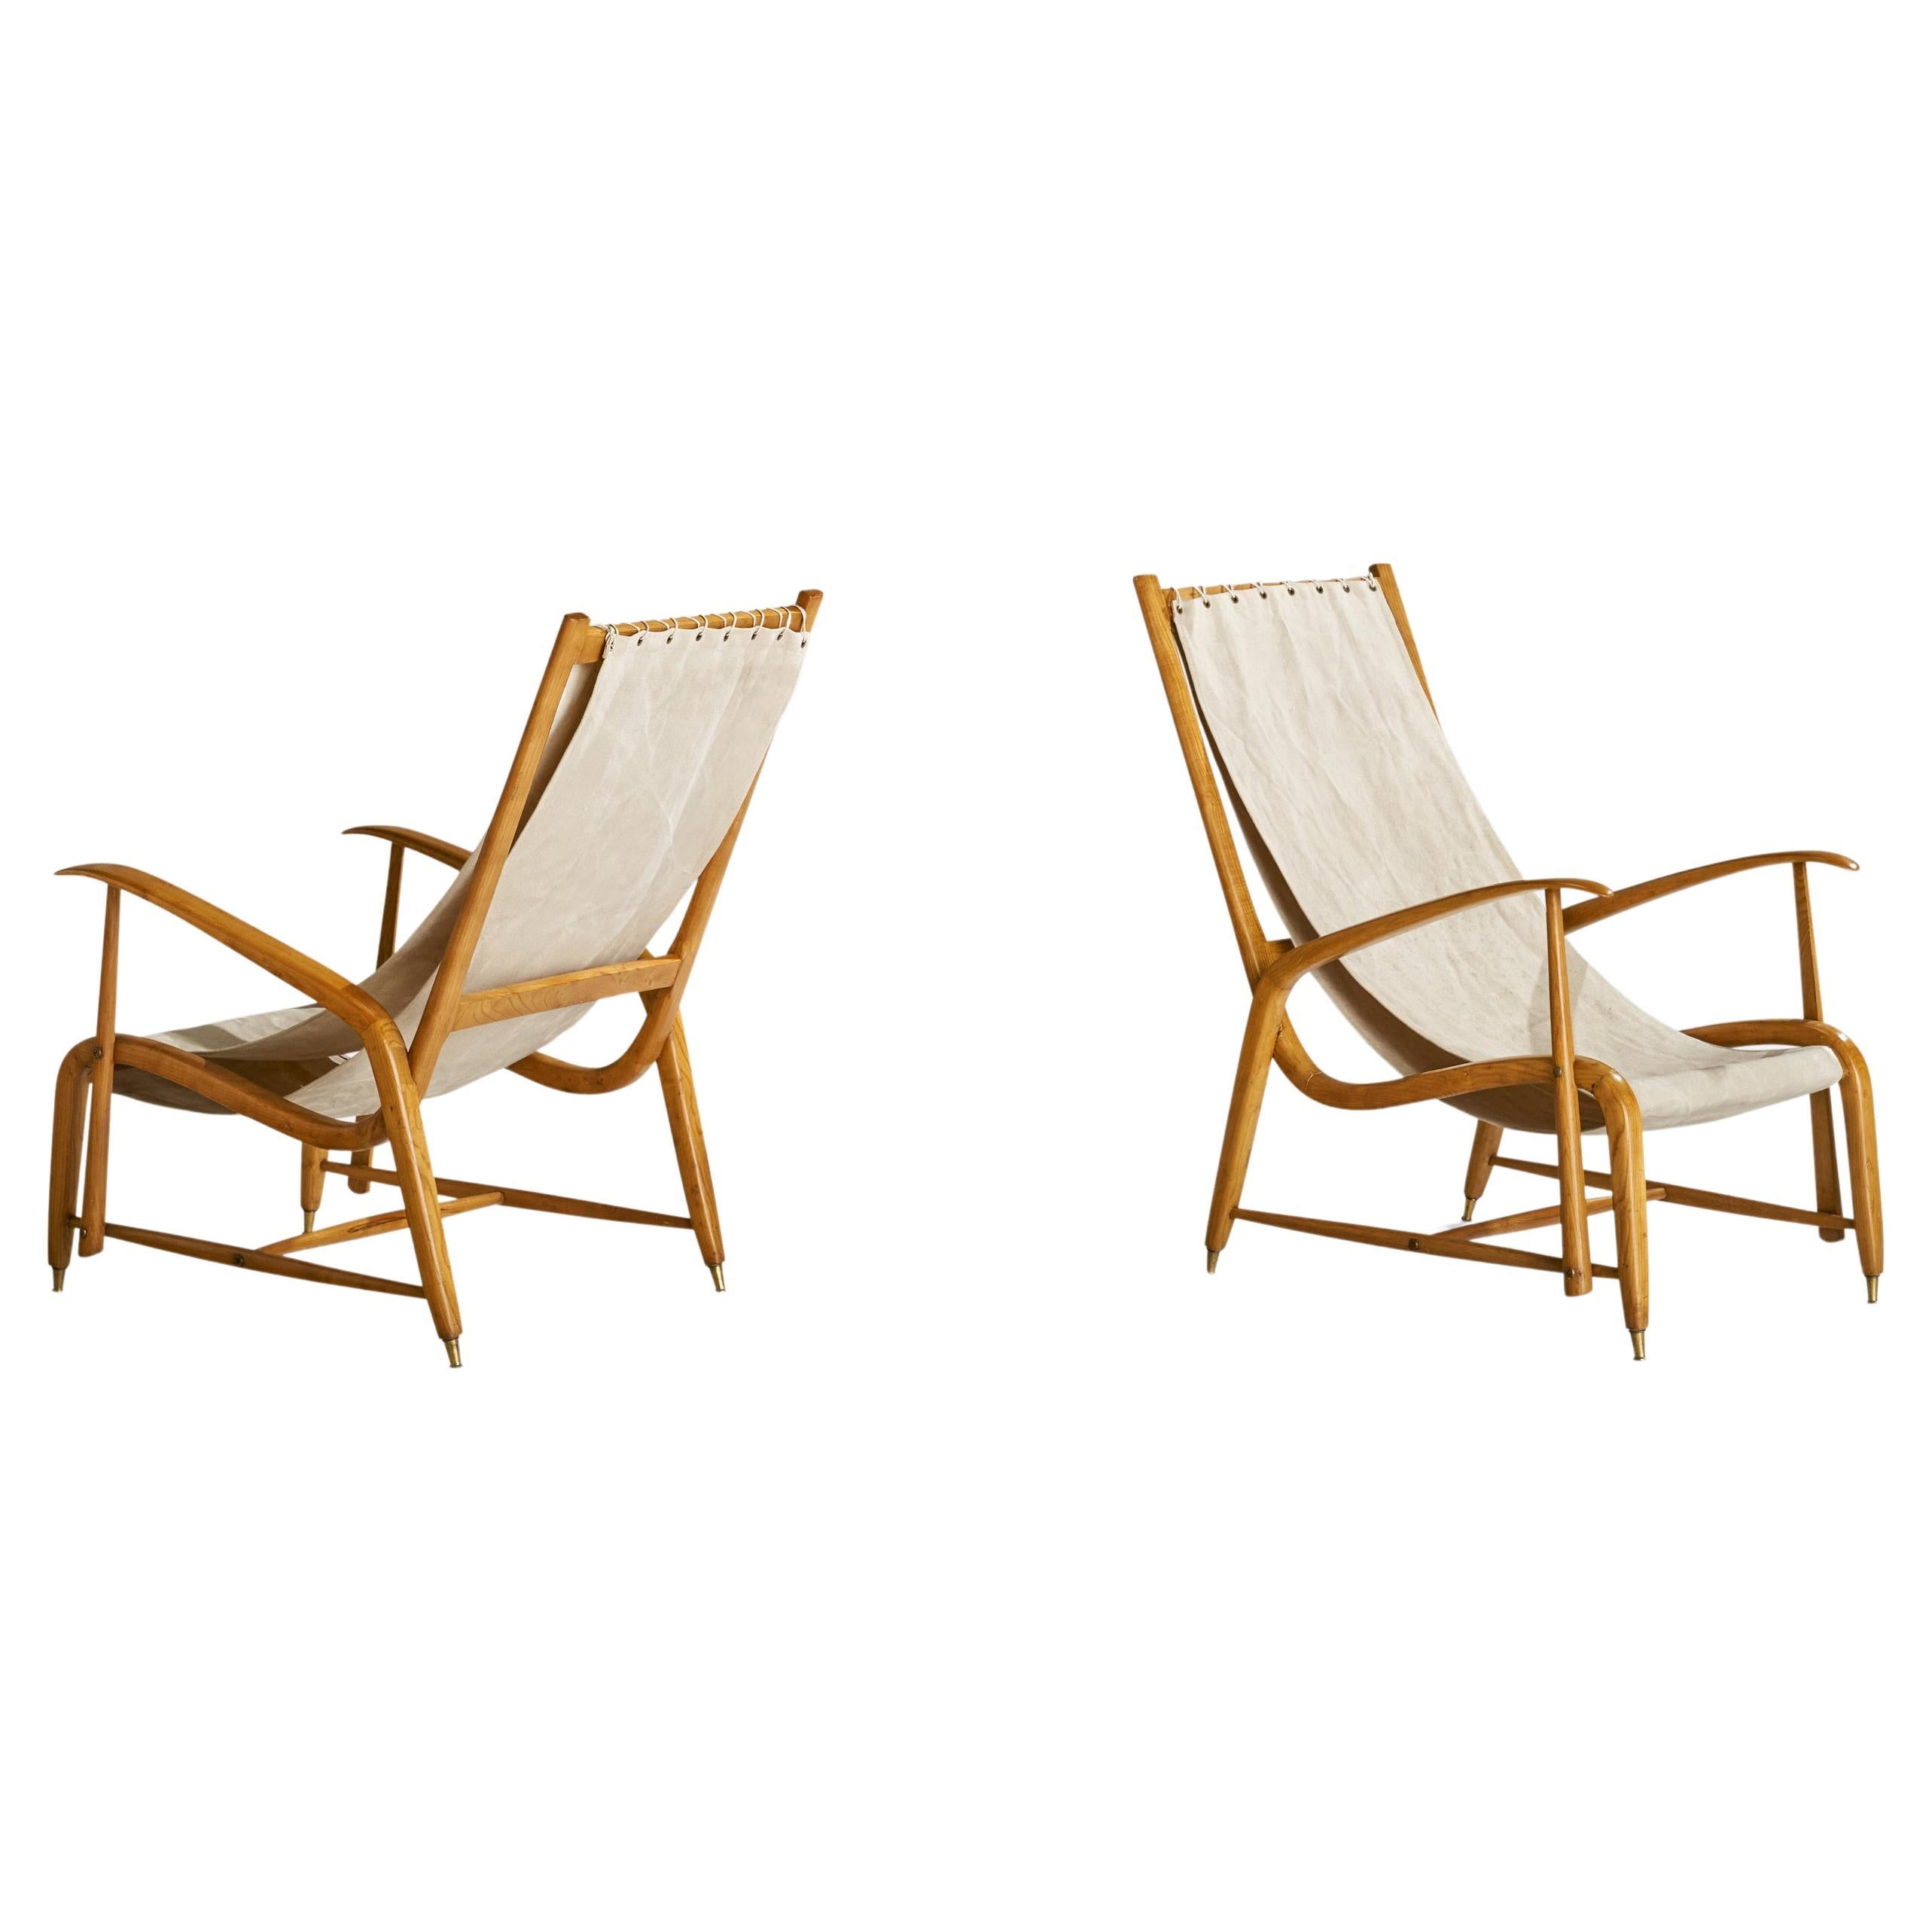 Studio BBPR Attribution, Lounge Chairs, Oak, Brass, Canvas, Italy, 1950s For Sale